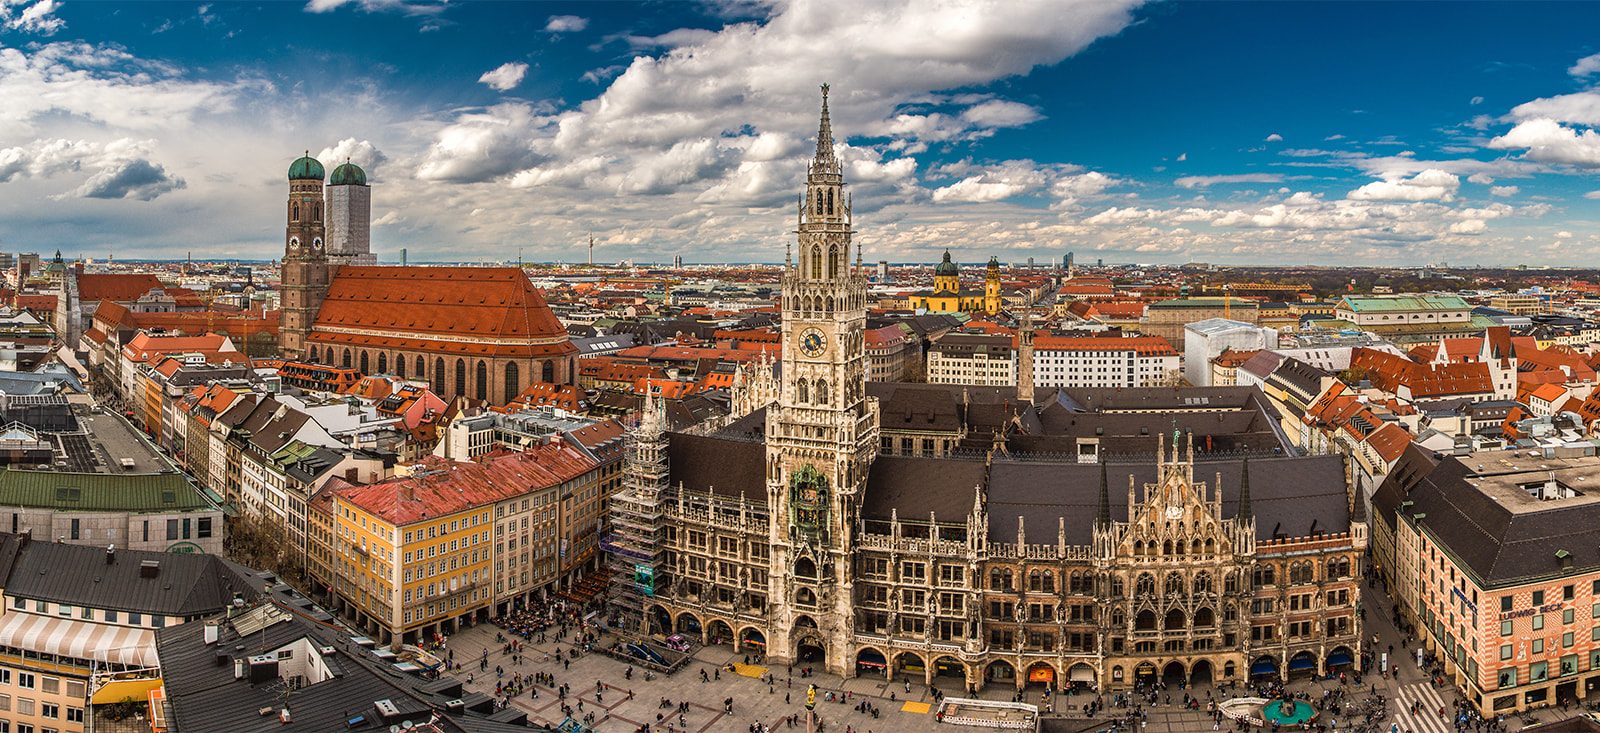 3 Star And 4 Star Hotels In Munich S City Center King S Hotels